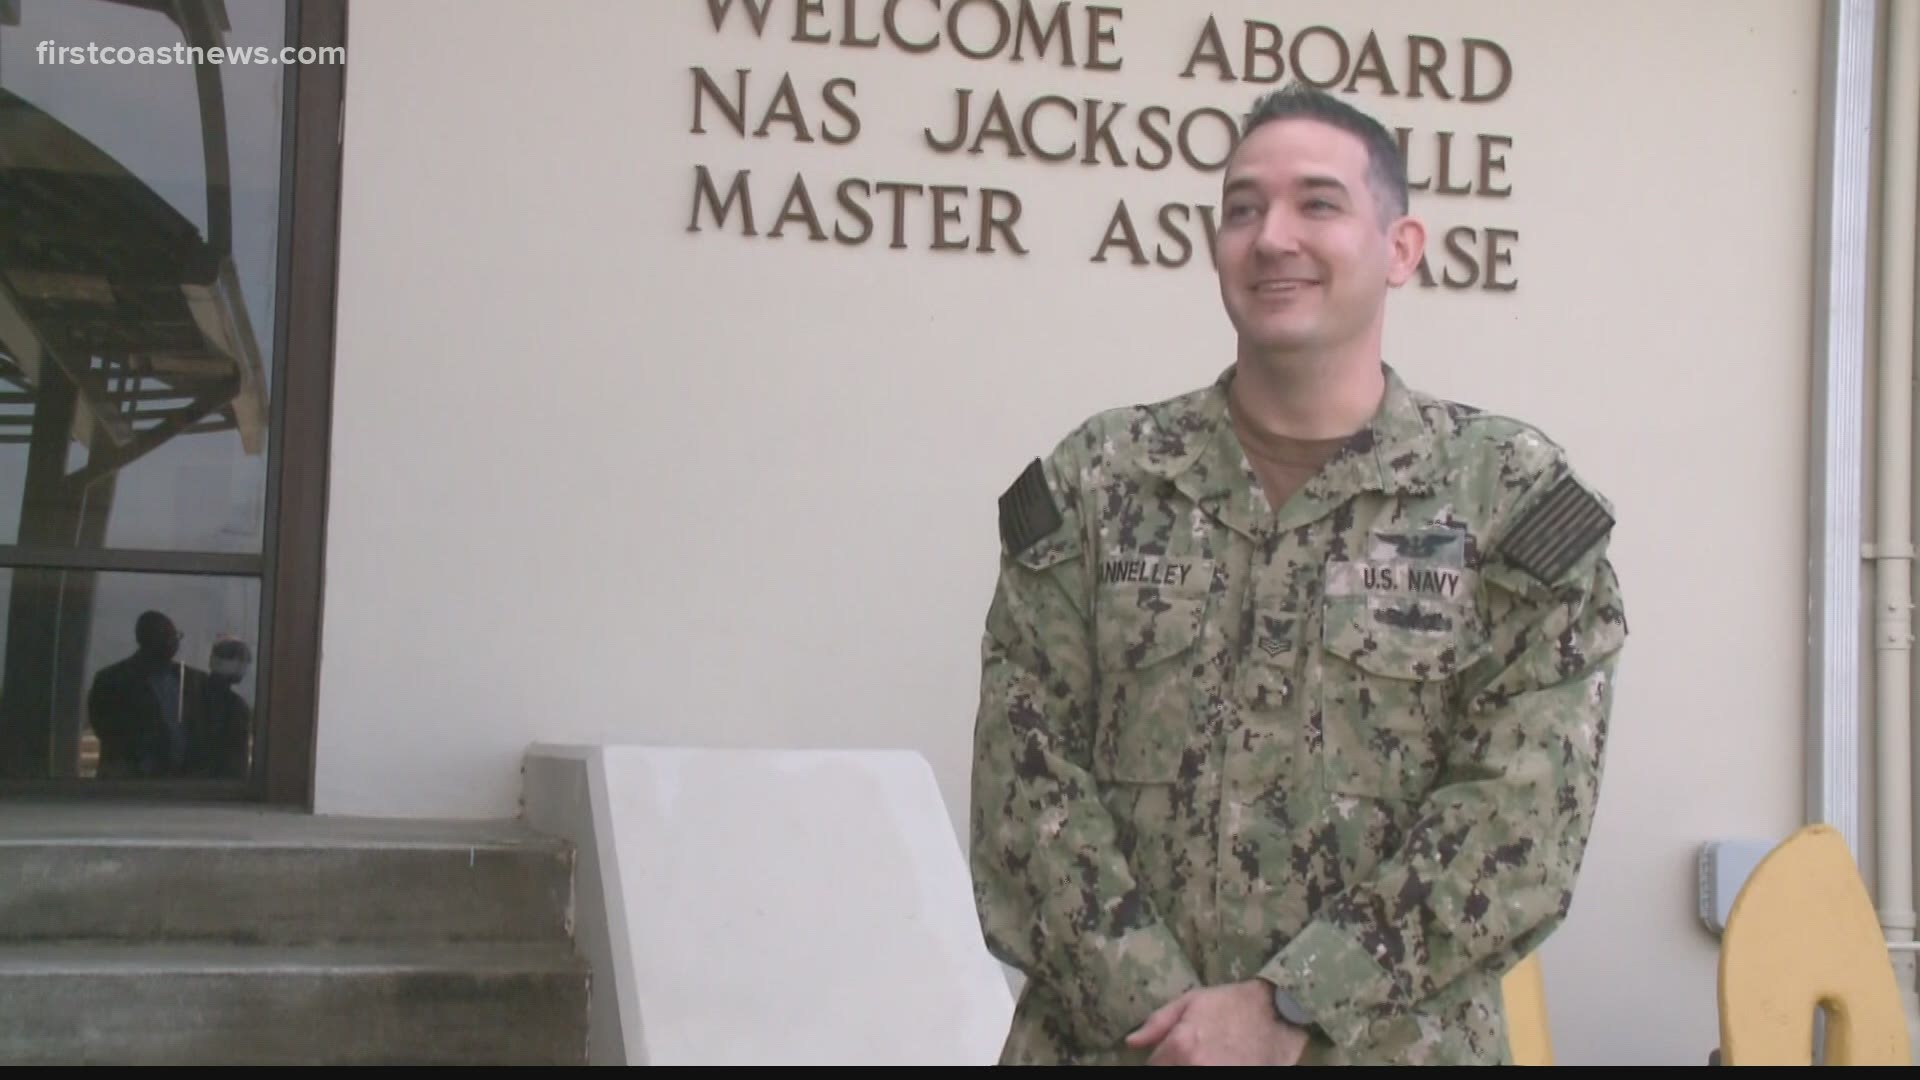 Dannelley was recently honored as Senior Sailor of the Quarter at NAS Jax.